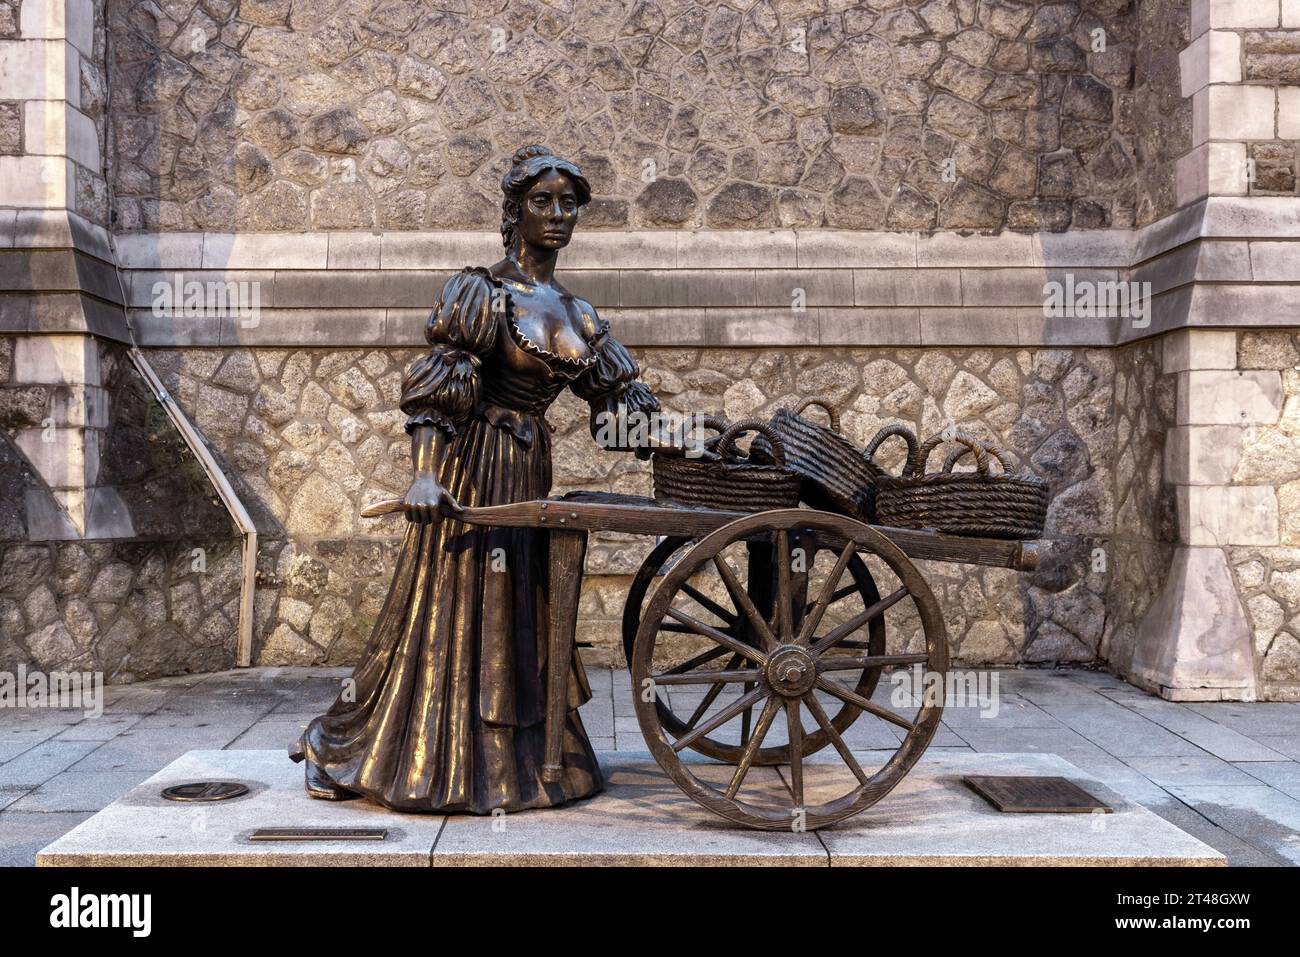 The Molly Malone Statue is a bronze statue of a young woman selling cockles and mussels on Grafton Street in Dublin, Ireland. Stock Photo